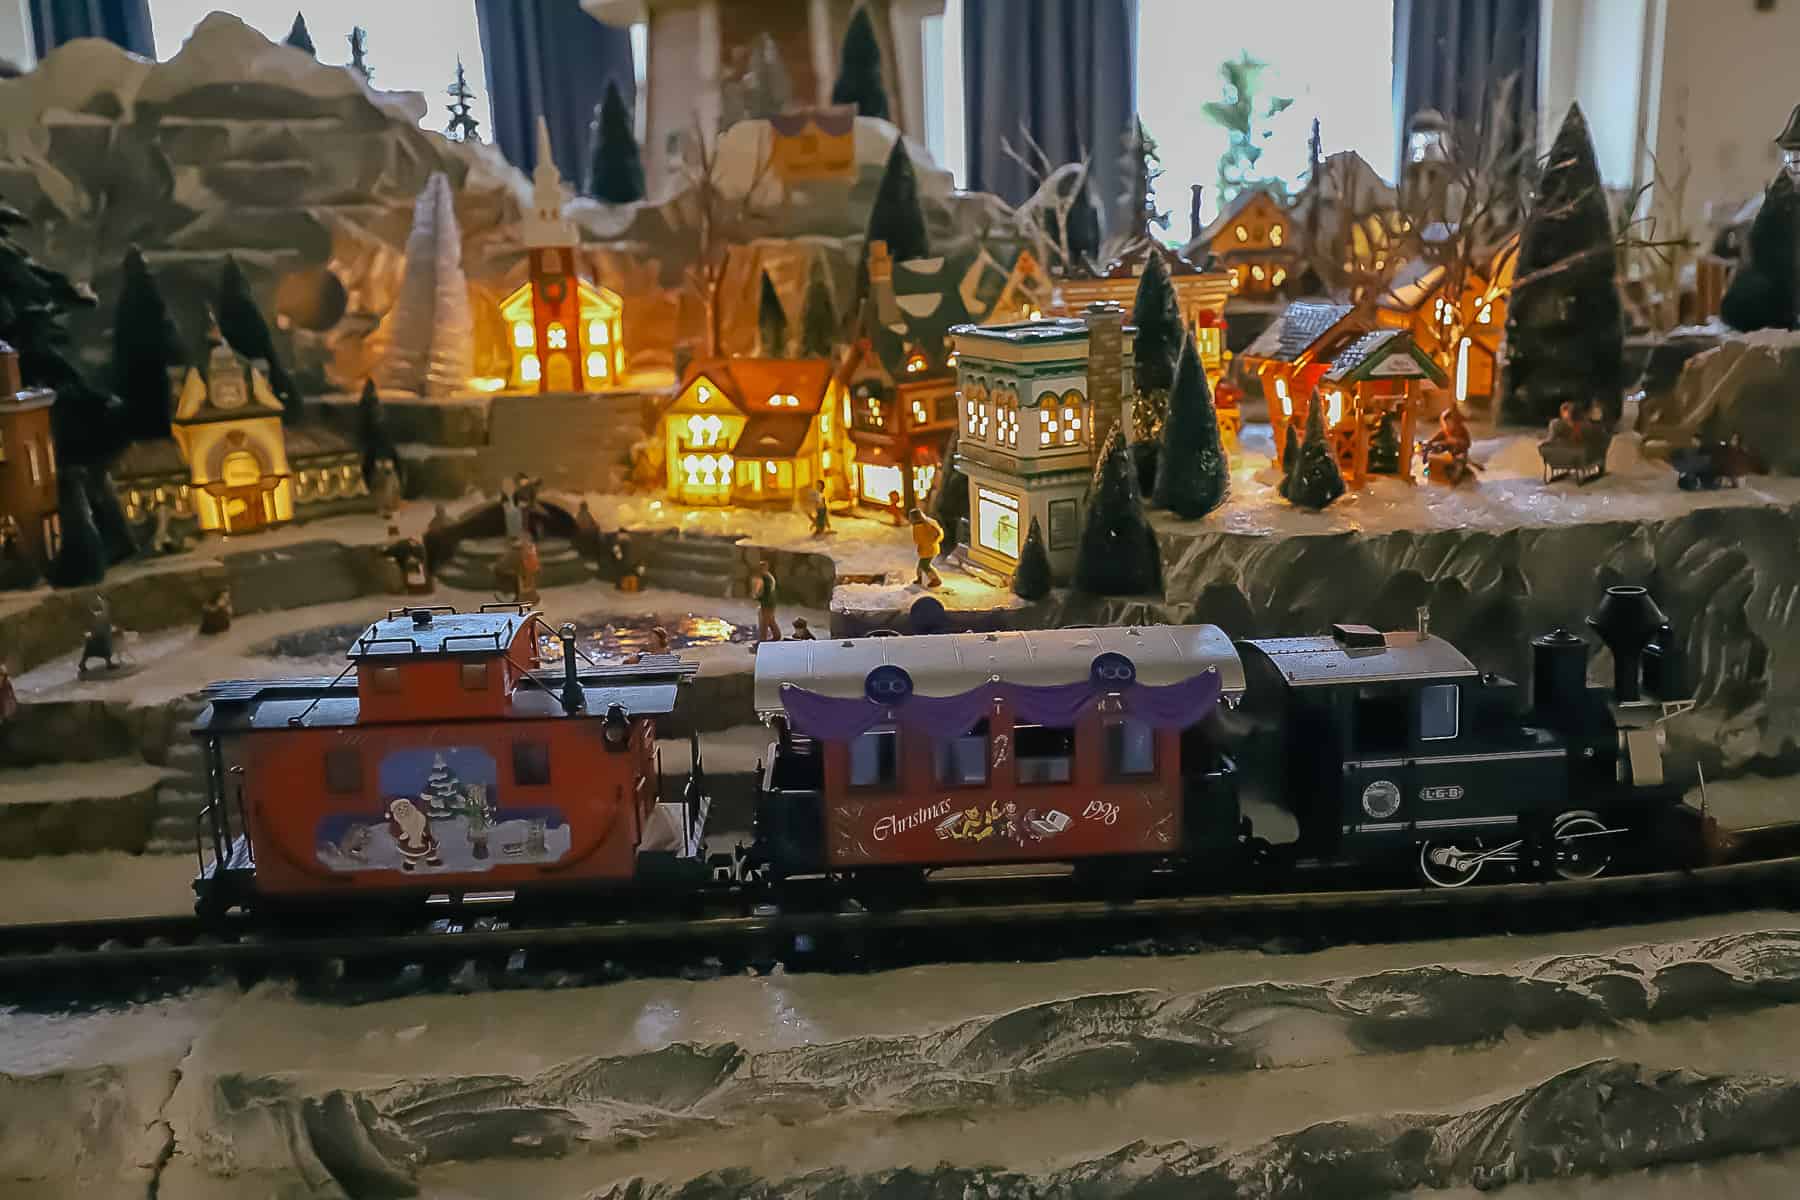 A miniature train with an engine, car, and a caboose on the train tracks.